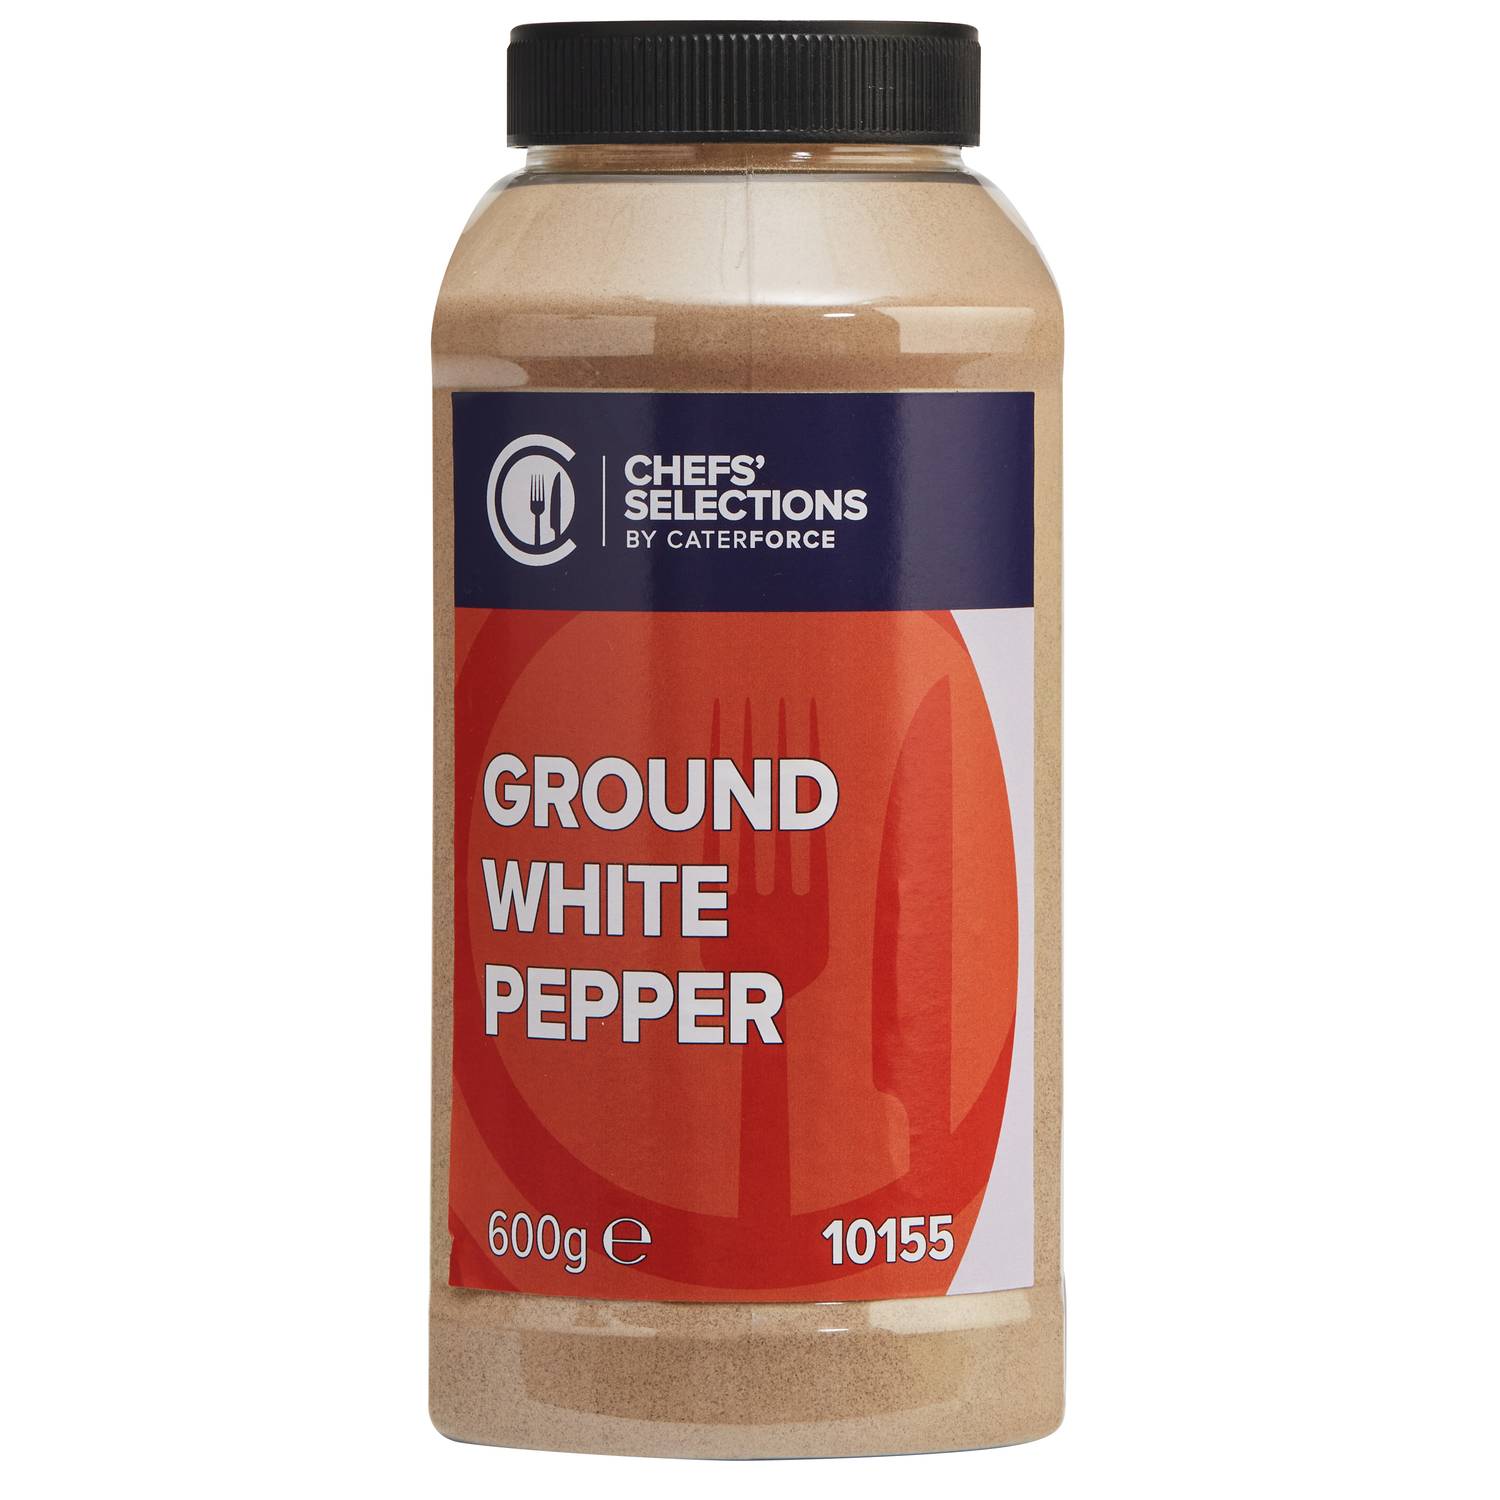 Chefs’ Selections Ground White Pepper (6 x 600g)